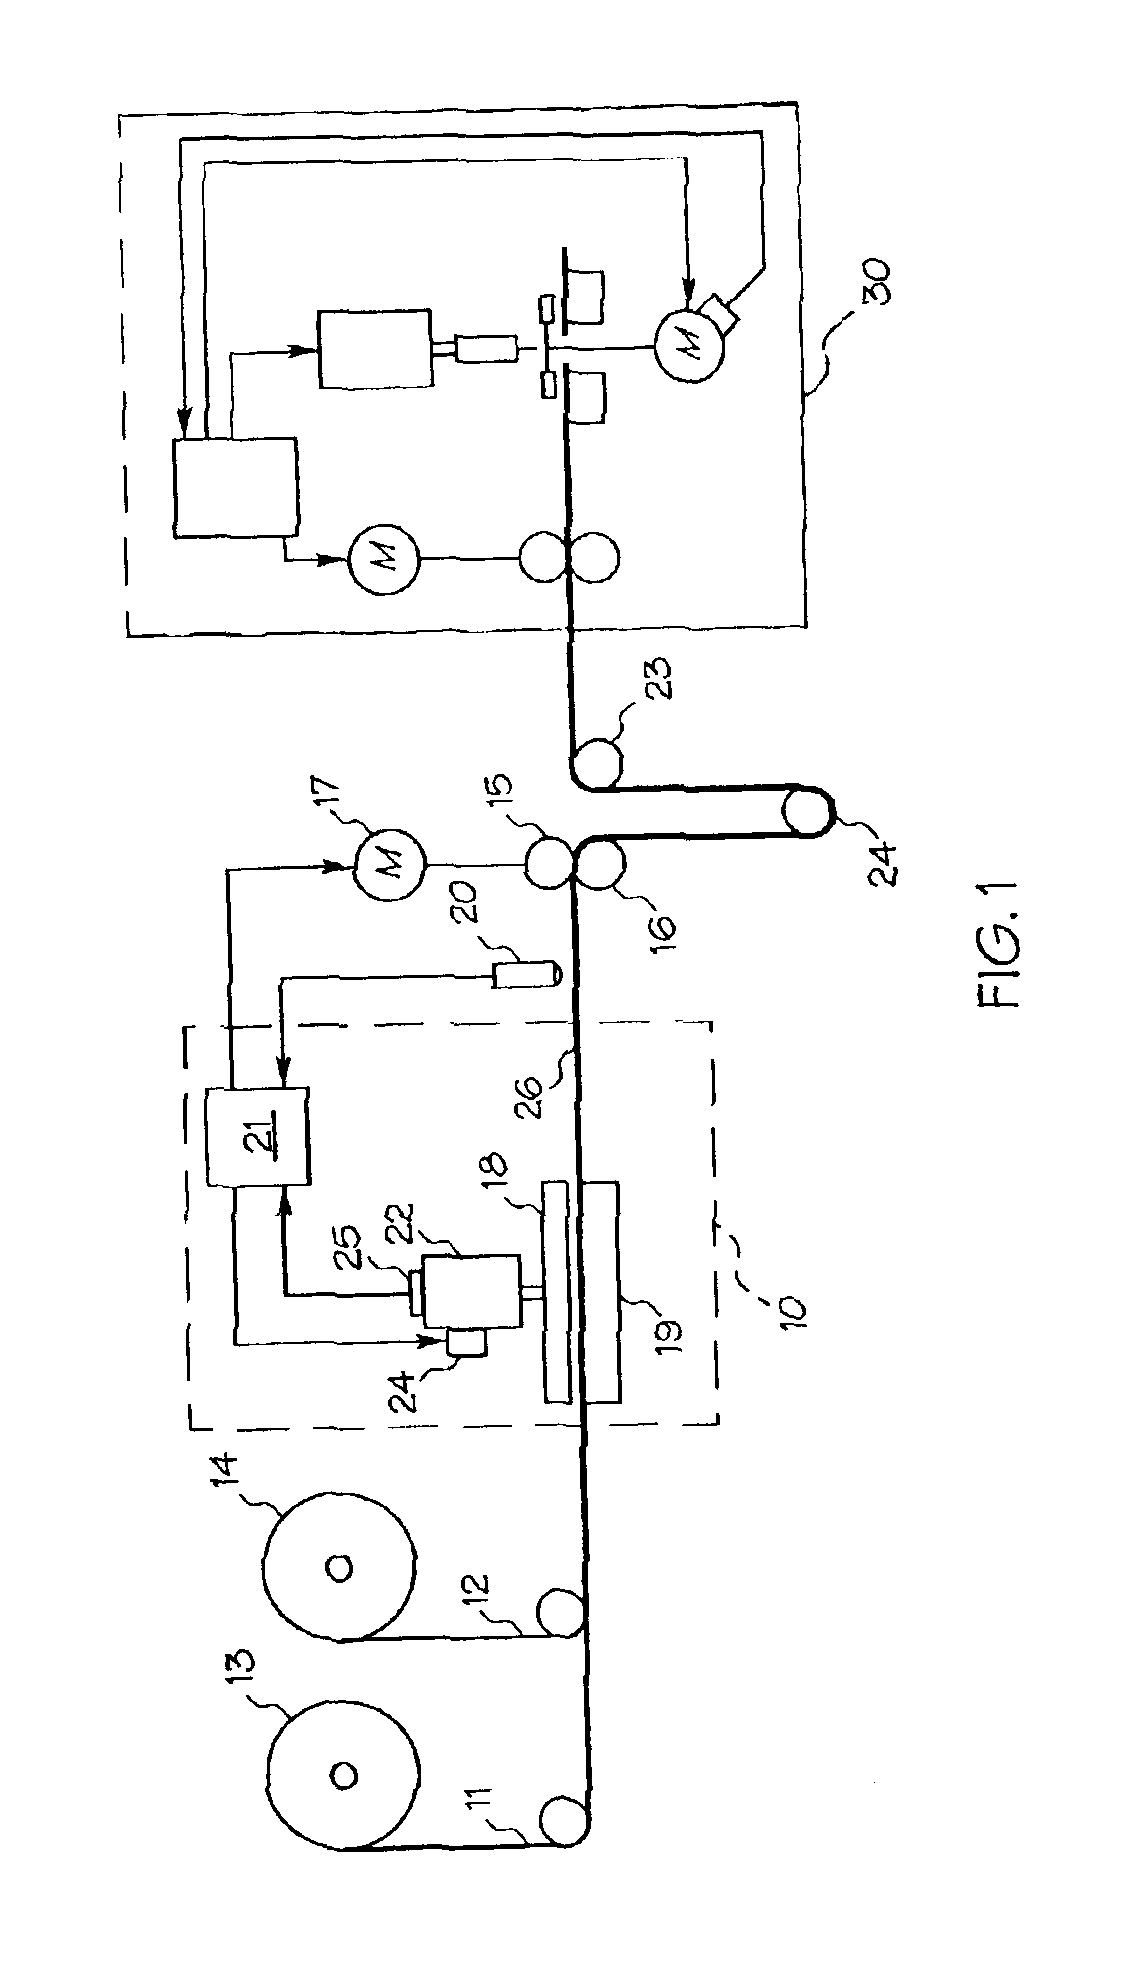 Electric actuator to produce a predetermined force